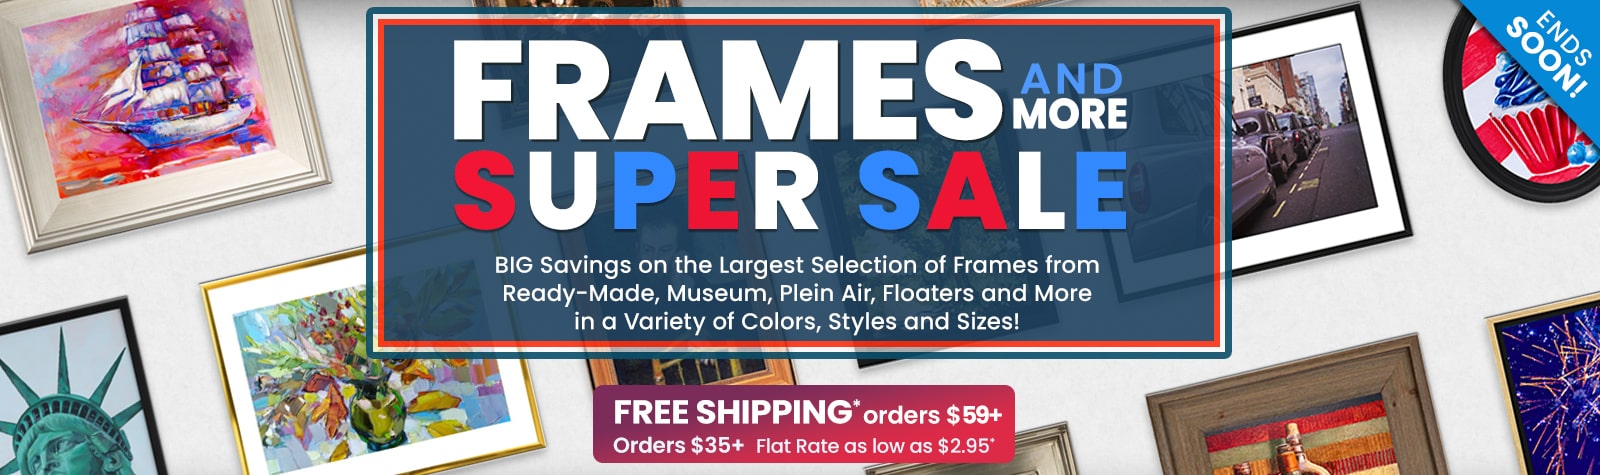 Everything Frames Super Sale - Up to 84% Off List Price